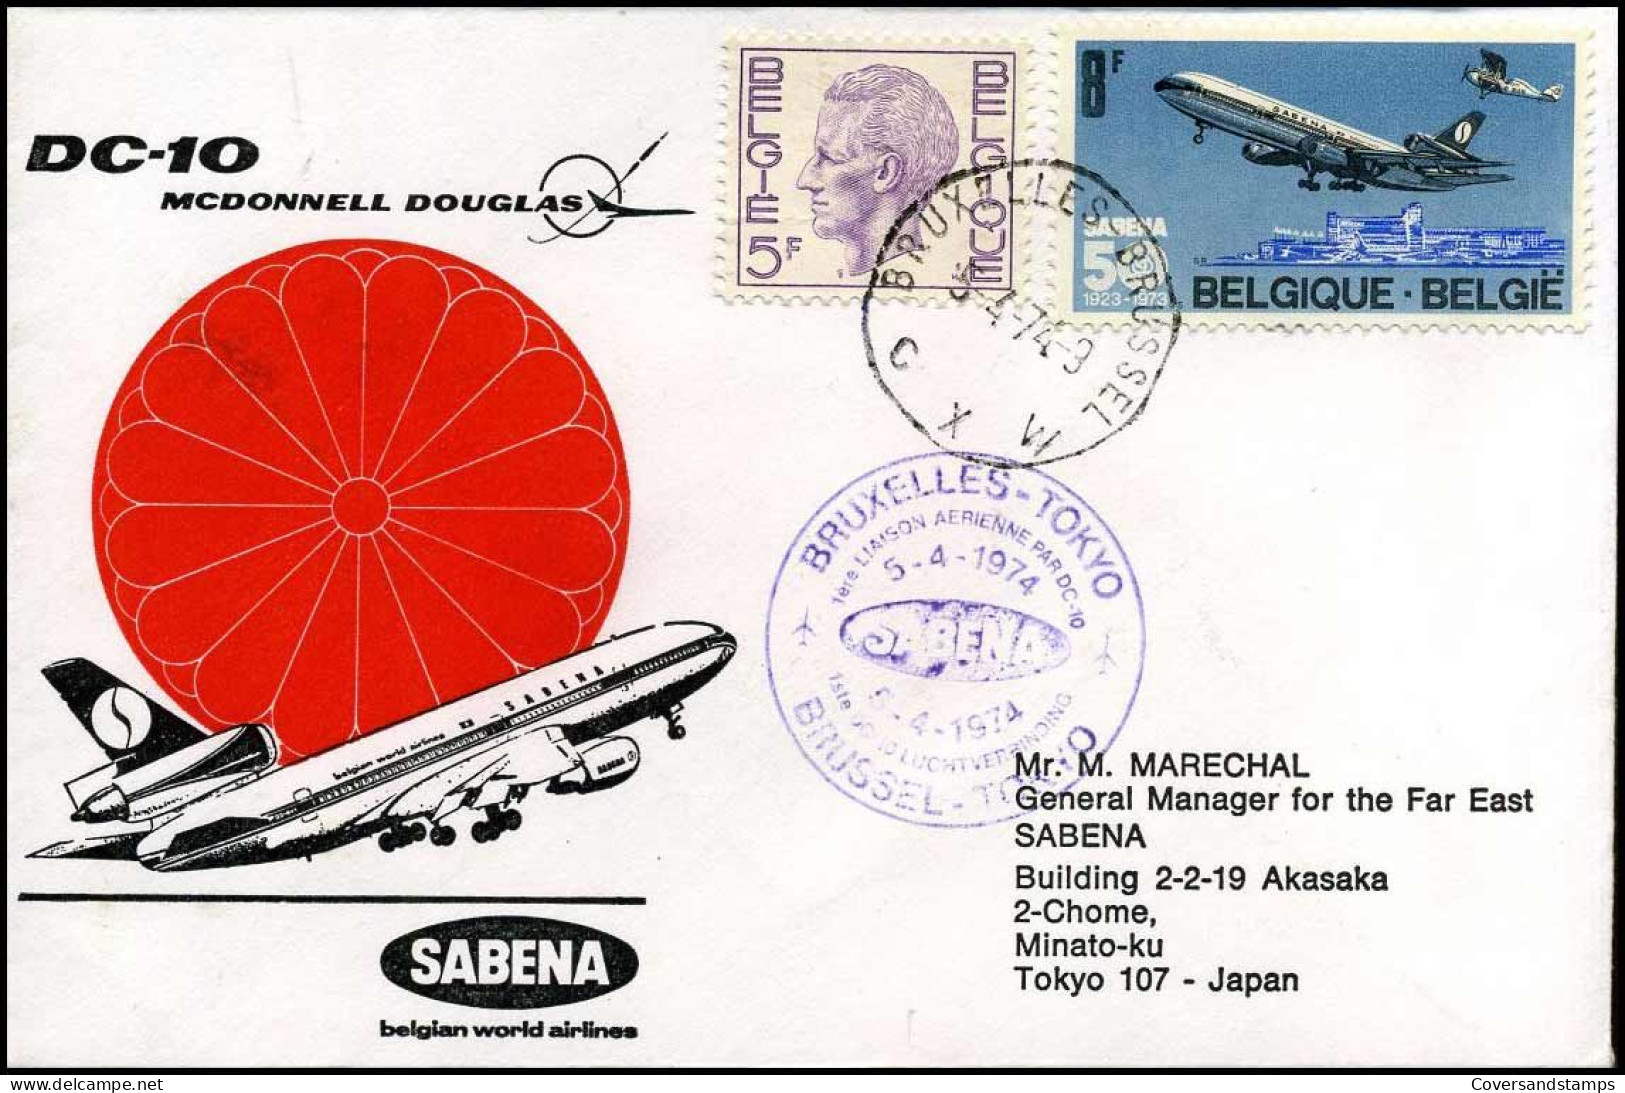 First Flight Brussels-Tokyo, DC-10, SABENA - Covers & Documents